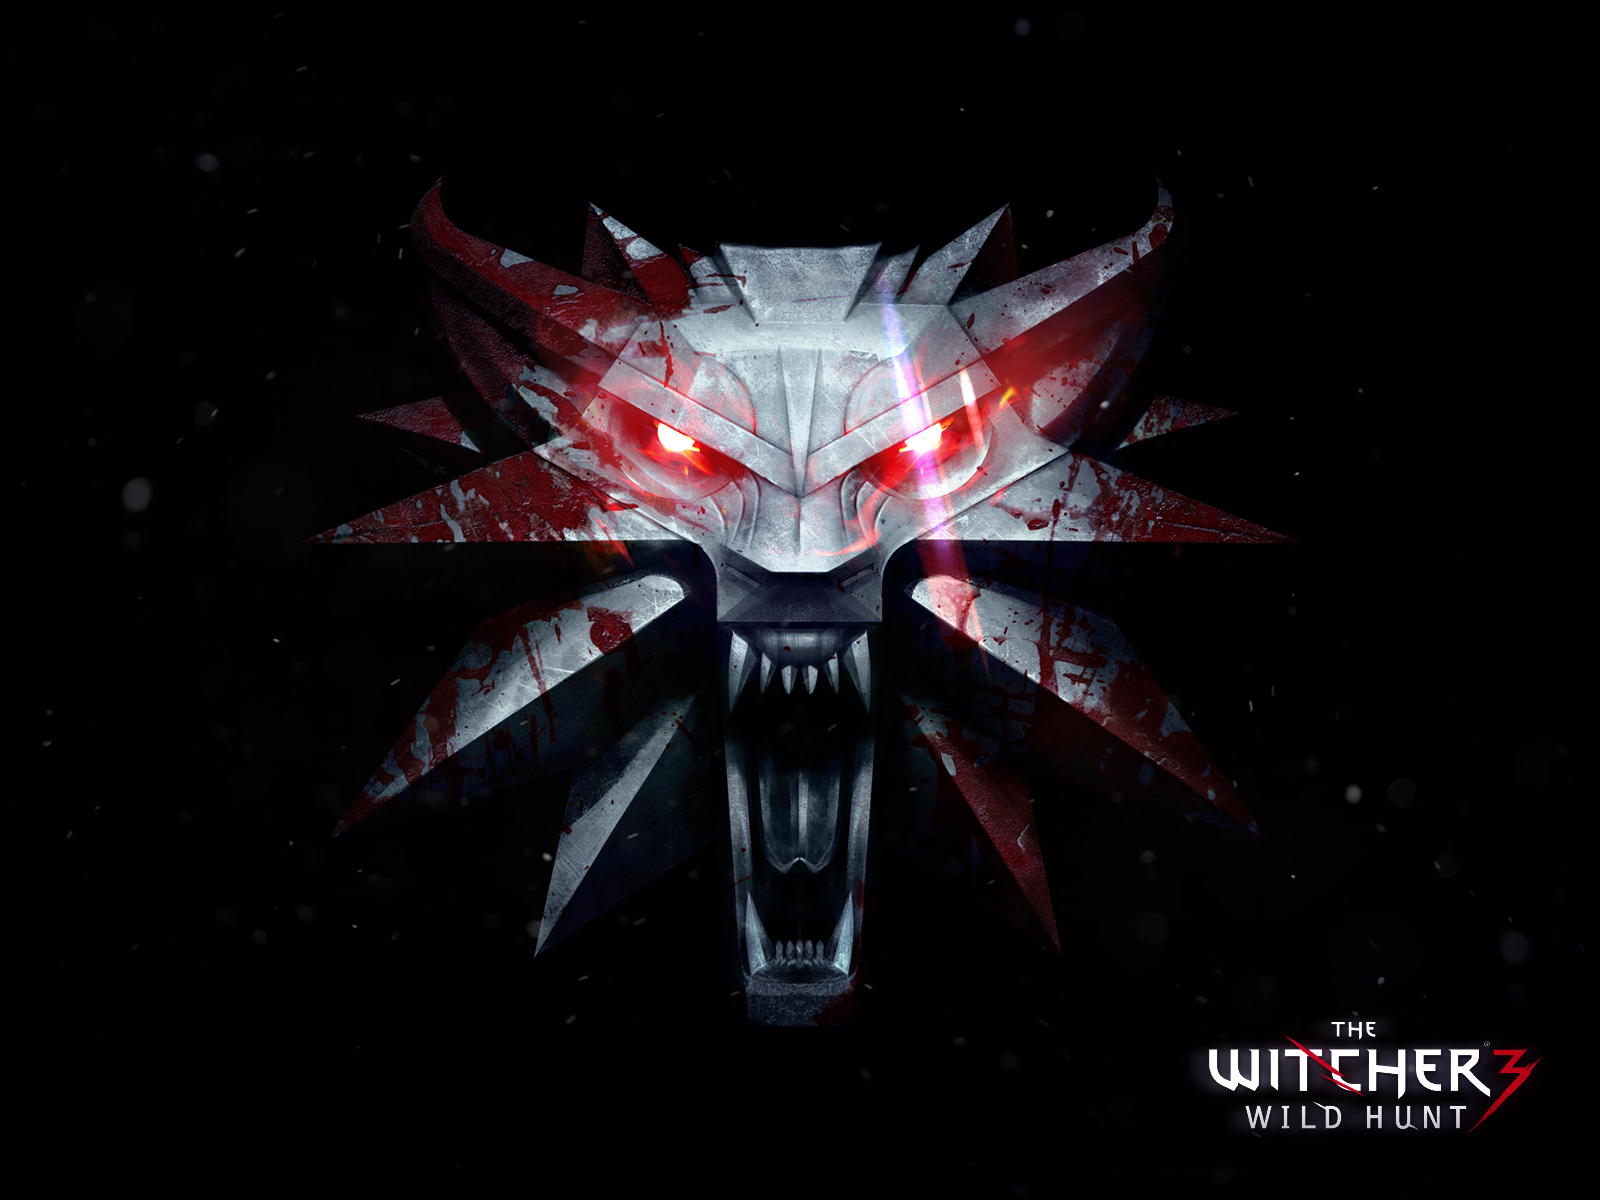 Free Backgrounds black, witcher